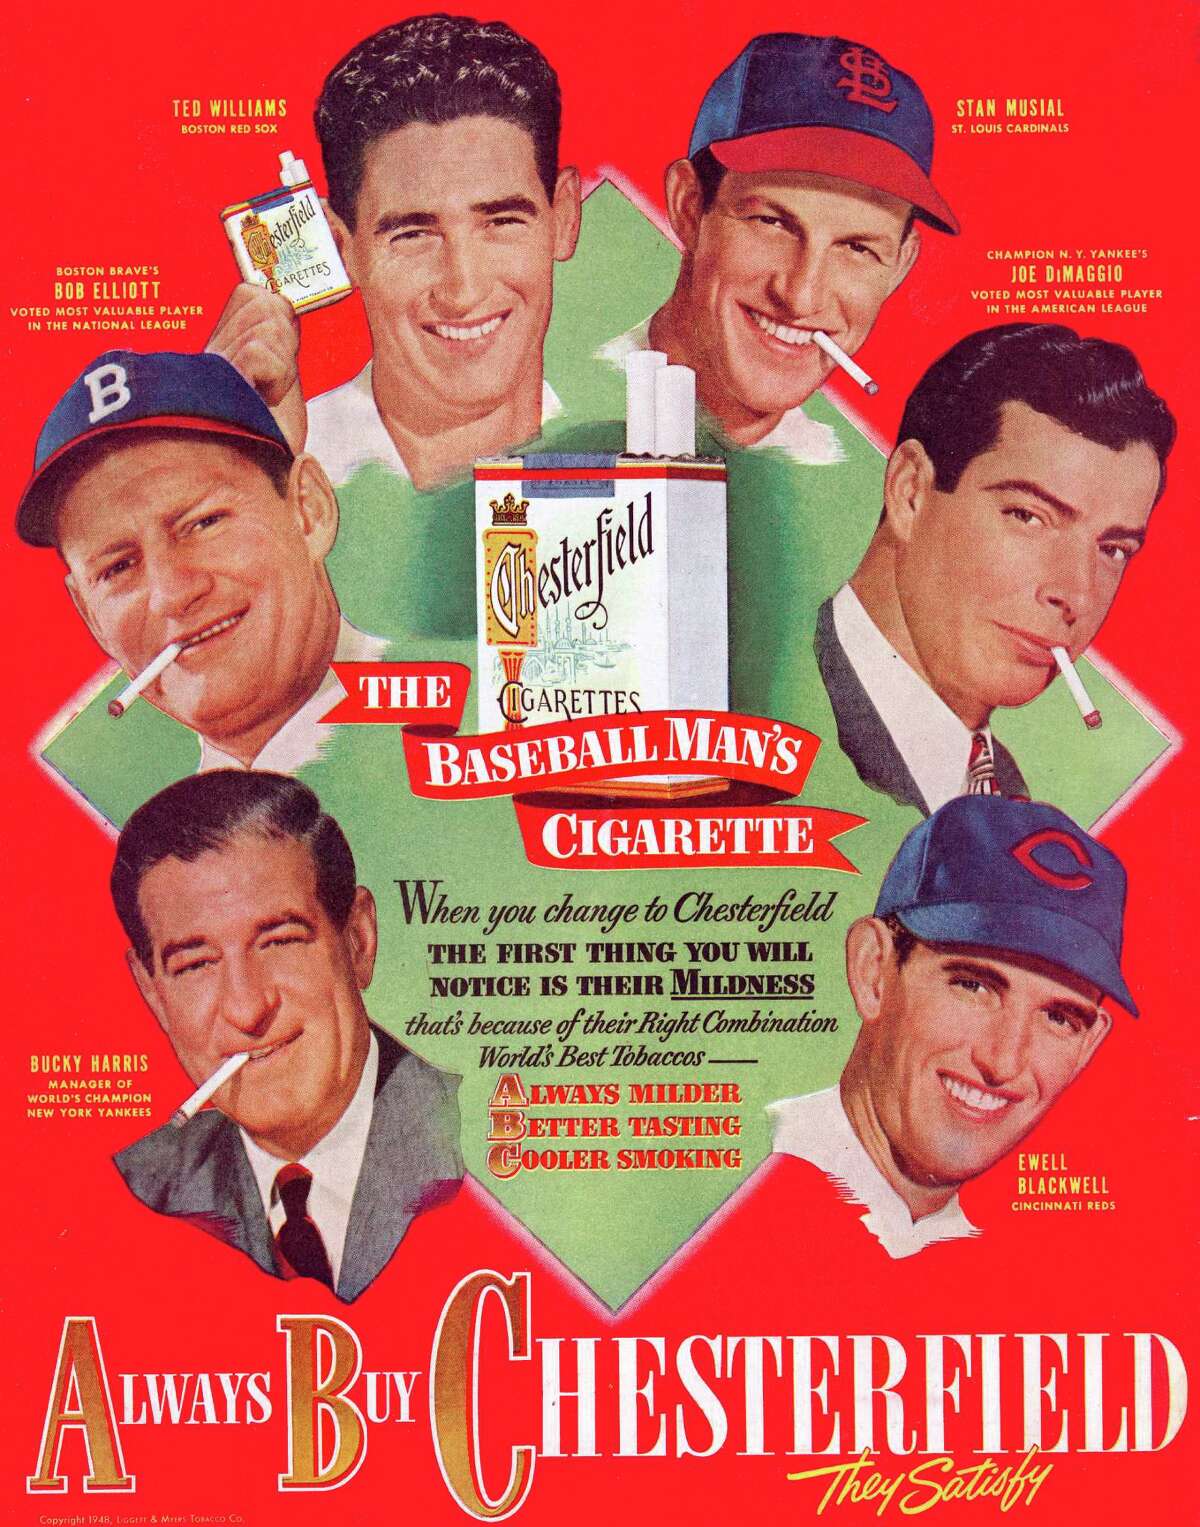 Chesterfield cigarettes hires baseball players to advertise their products in a magazine ad from around 1950, produced in Durham, North Carolina. The ad includes Ted Williams, Stan Musial, Joe DiMaggio, Jackie Jensen, Bucky Harris, and Ewell Blackwell.